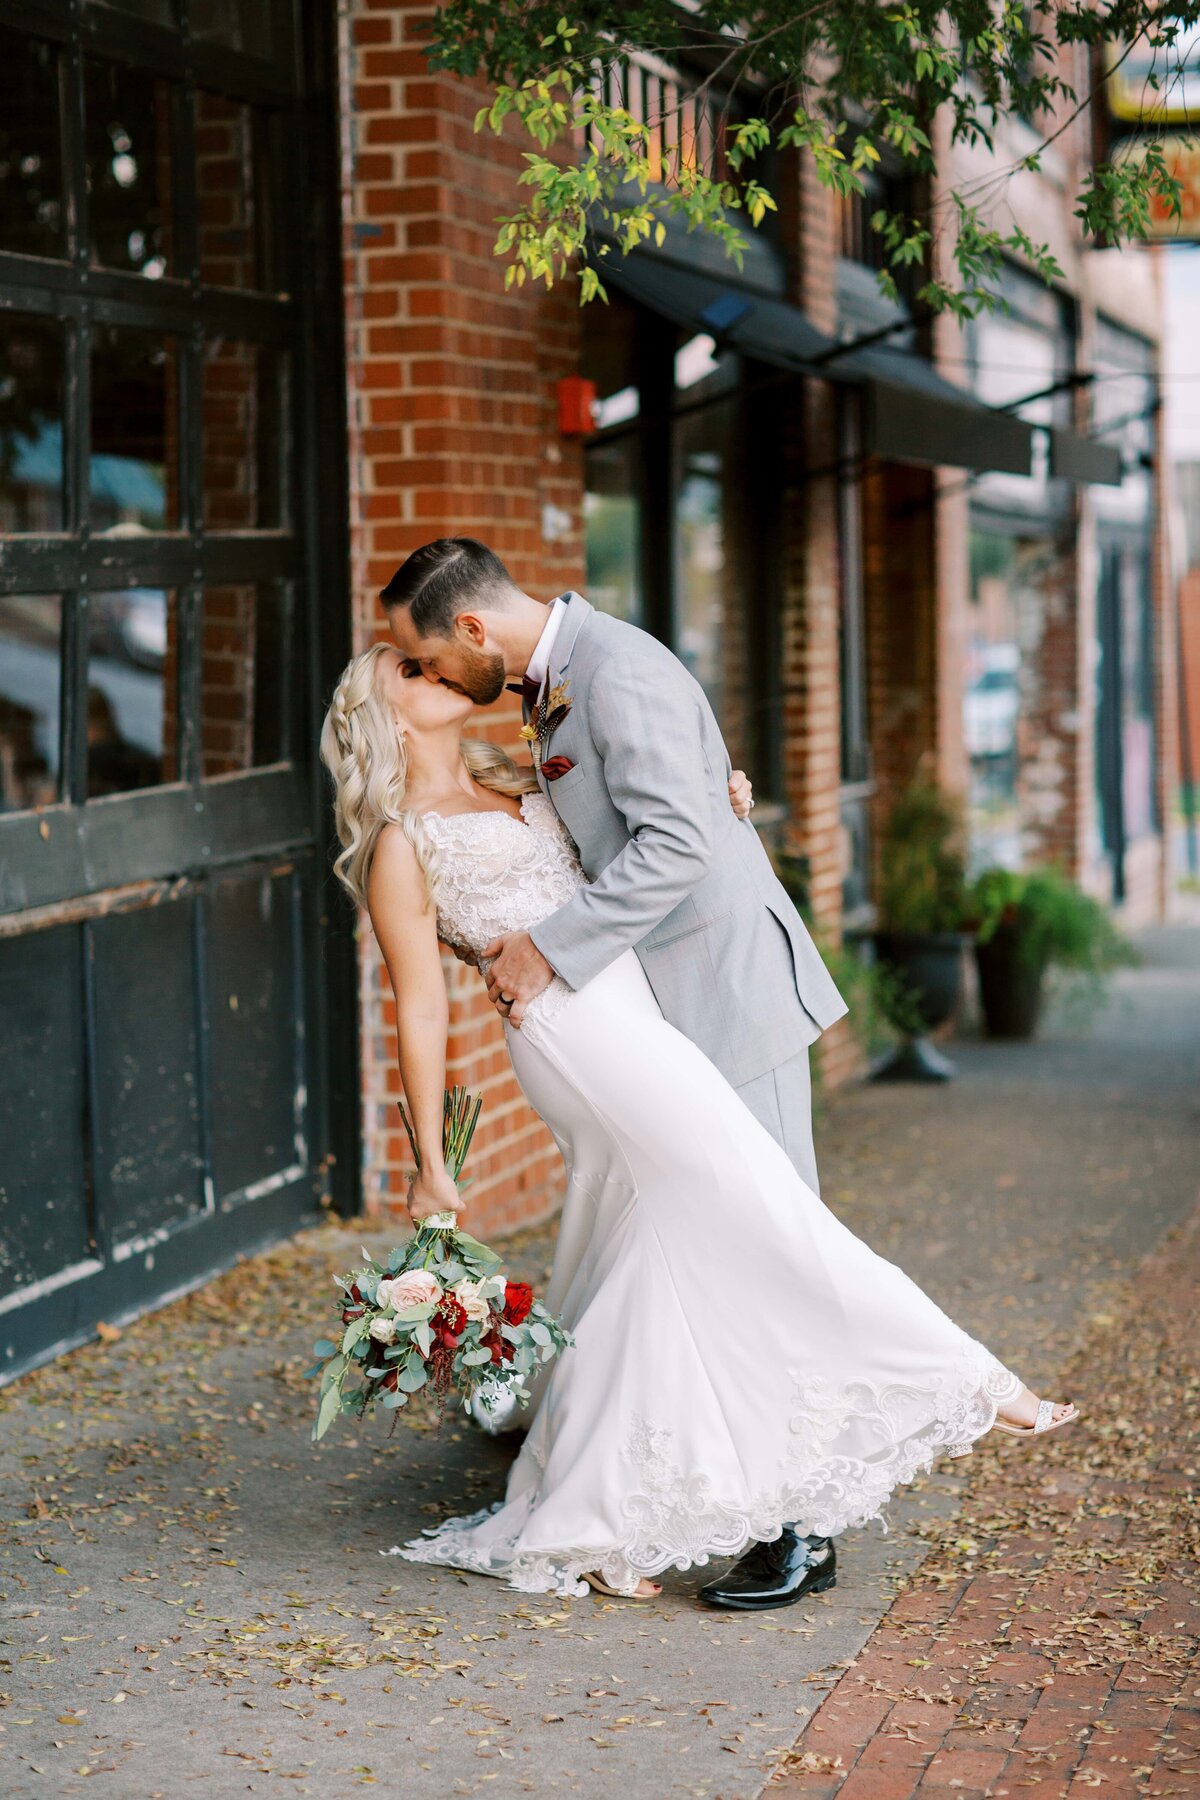 Bride and groom share romantic dip kiss outside on the street with the bride leaning back holding her bouquet of orchids and roses.